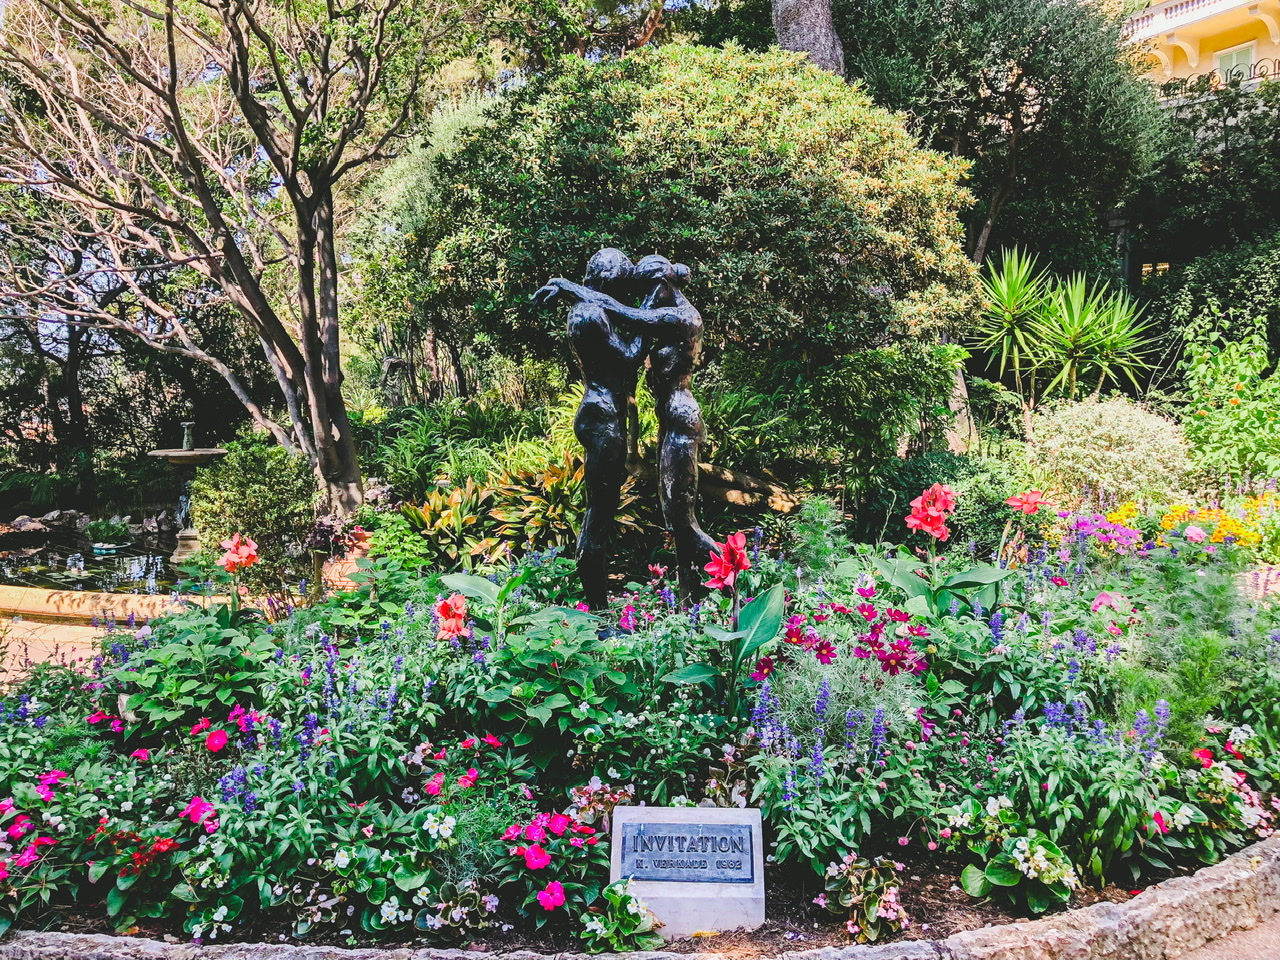 Statue of couple embracing surrounded by green fauna with pink and purple flowers in Les Jardins Saint-Martin